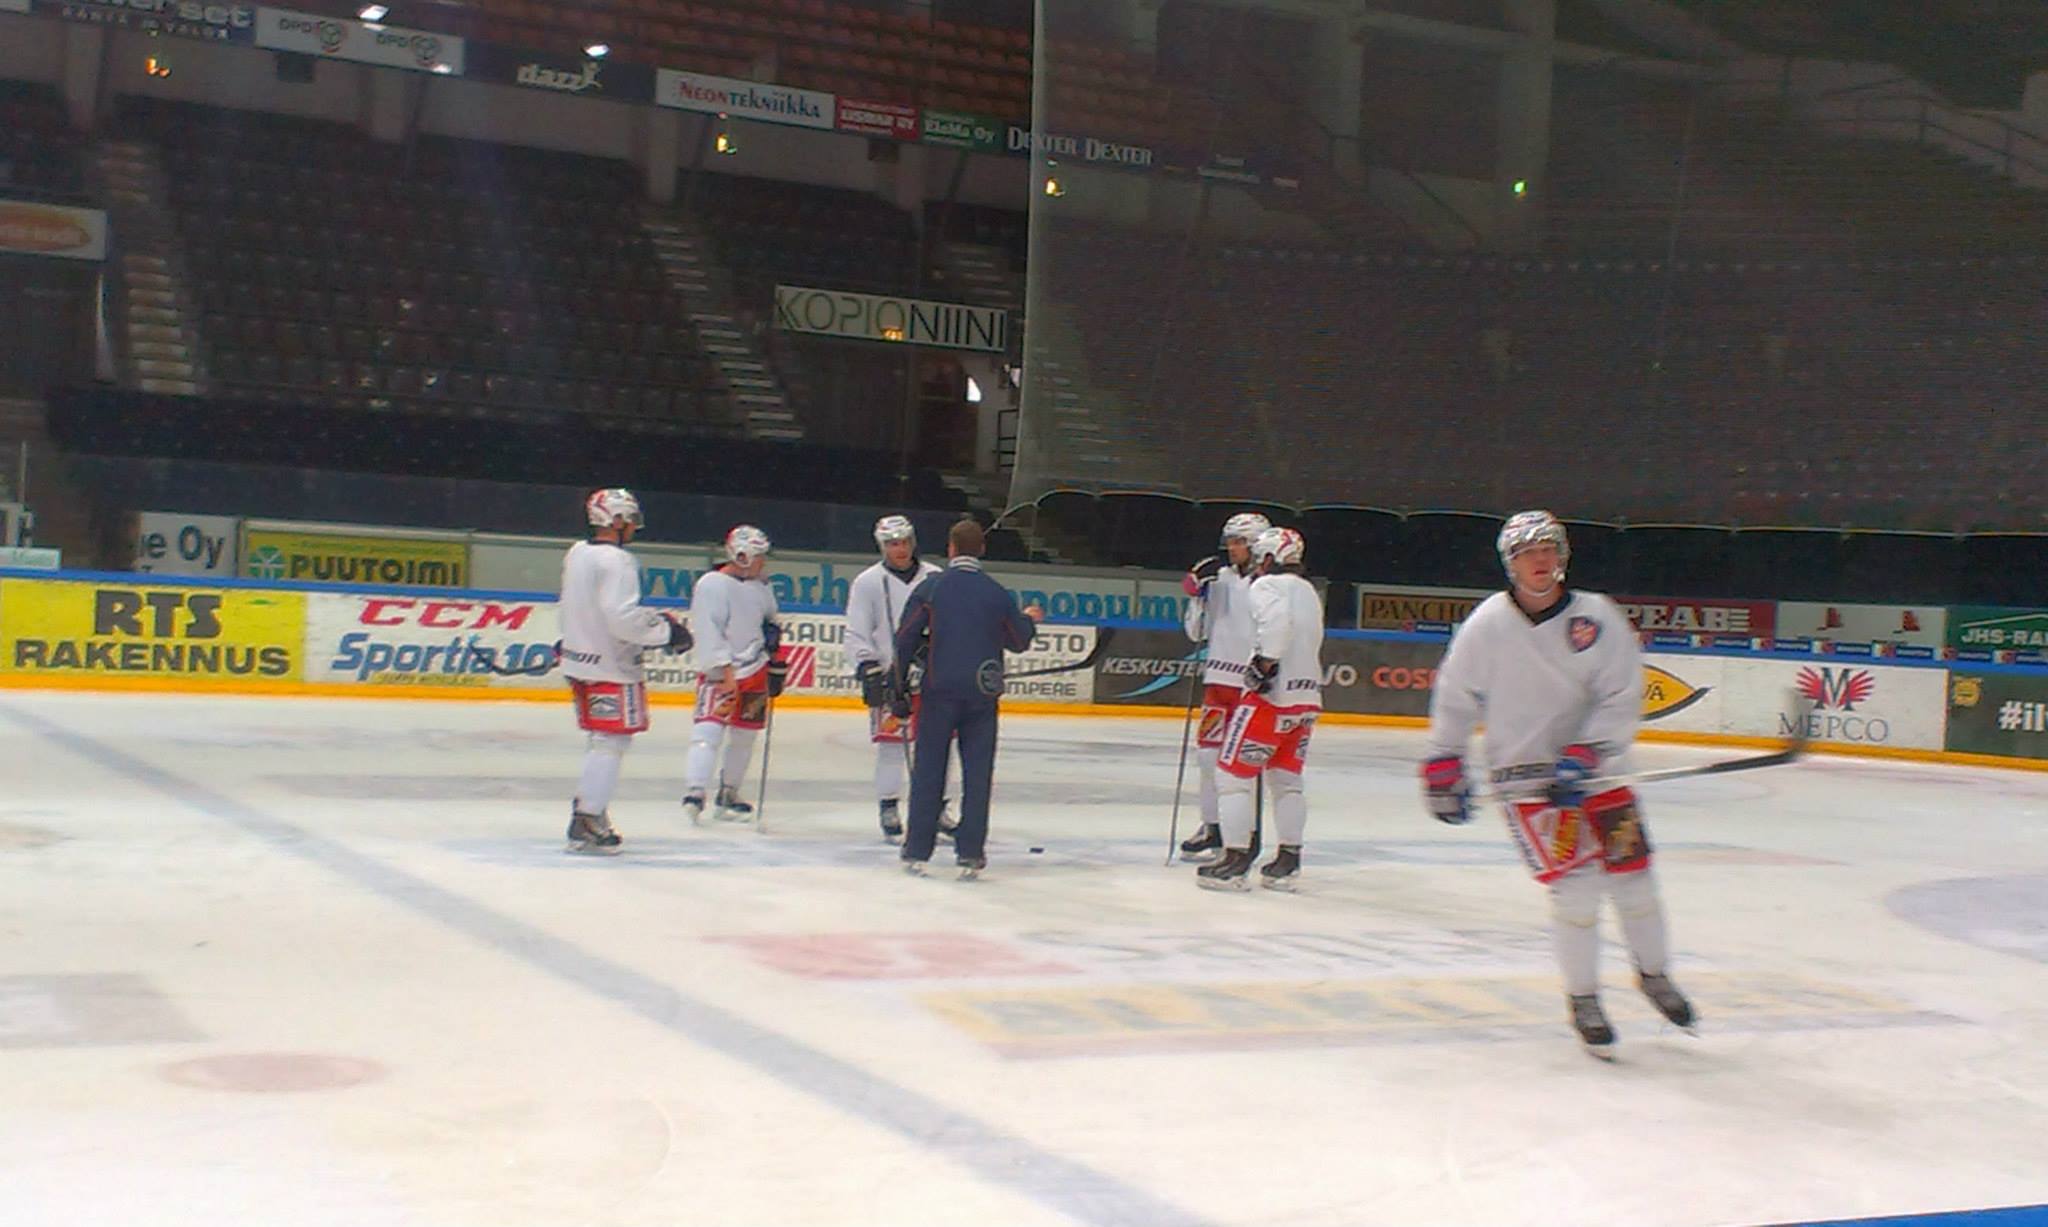 Nieminen (in the middle) listening to the coach on the training